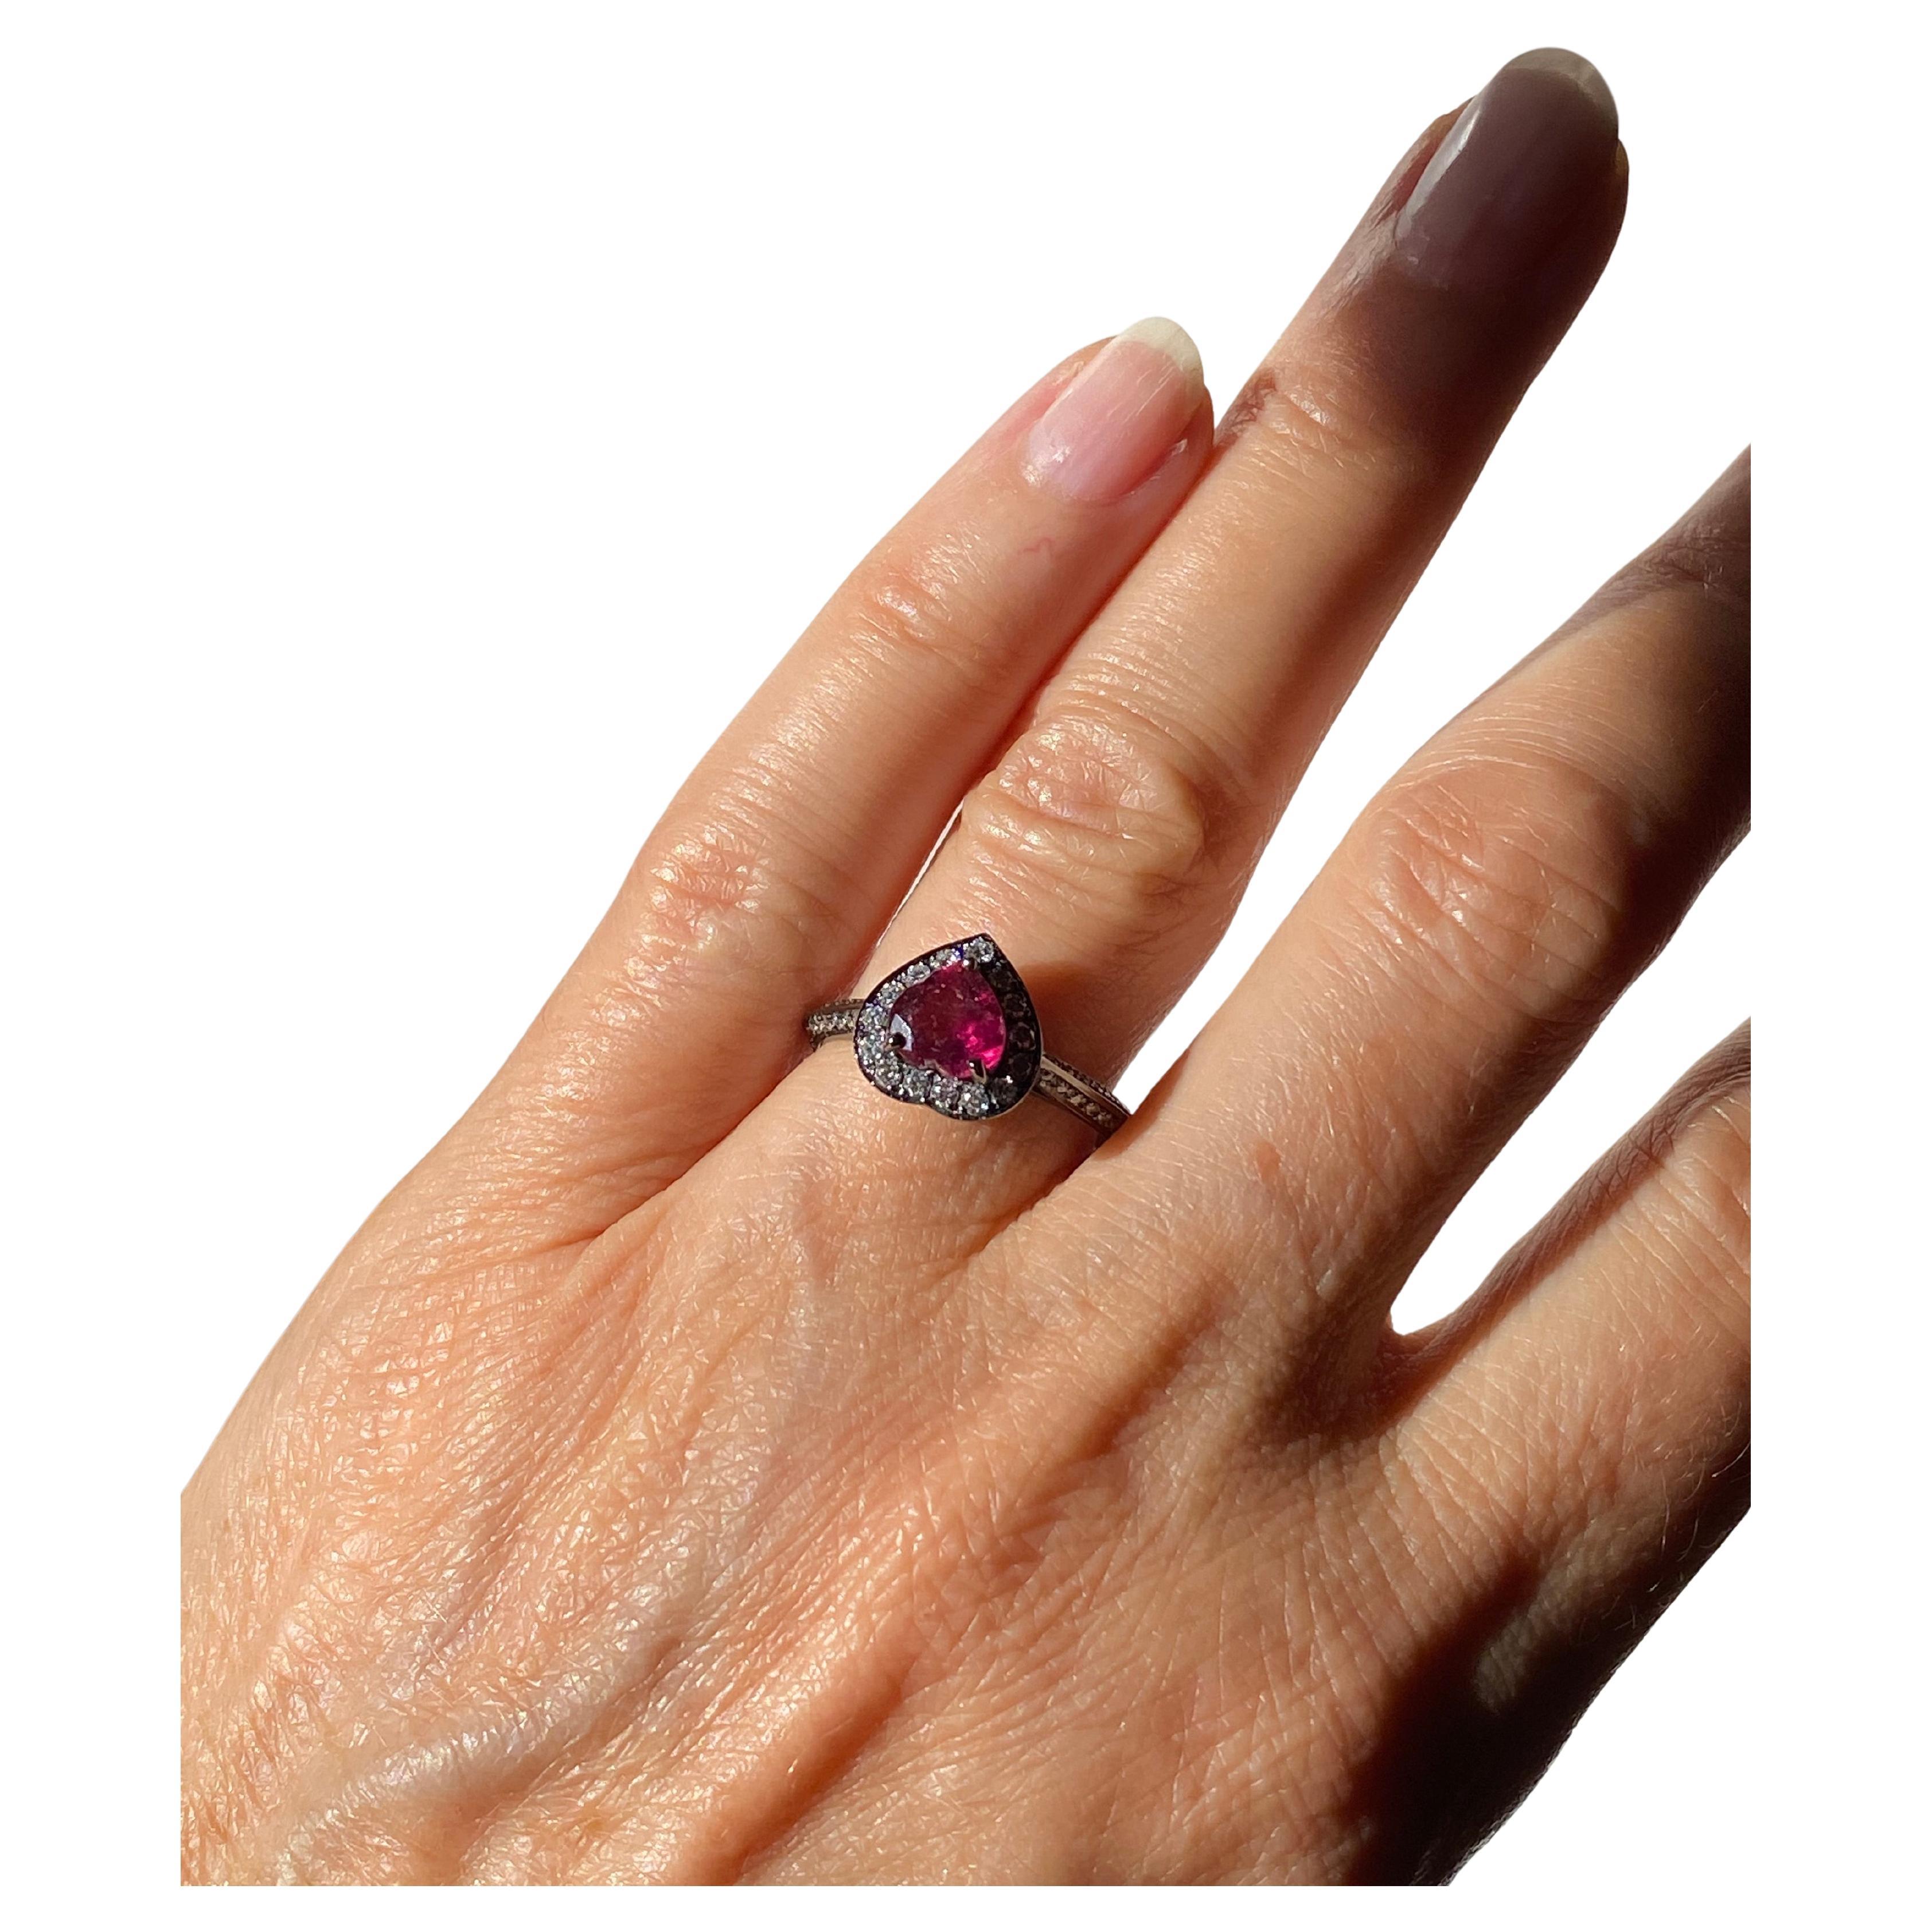 Rossella Ugolini Design Collection Classy heart shaped Rubelite set on a 18k White Gold black rhodium ring embellished with 0.50 Karats White Diamonds.  Available also in total white 18 k gold. Rubellite is the stone of Love, a truly exclusive gem.